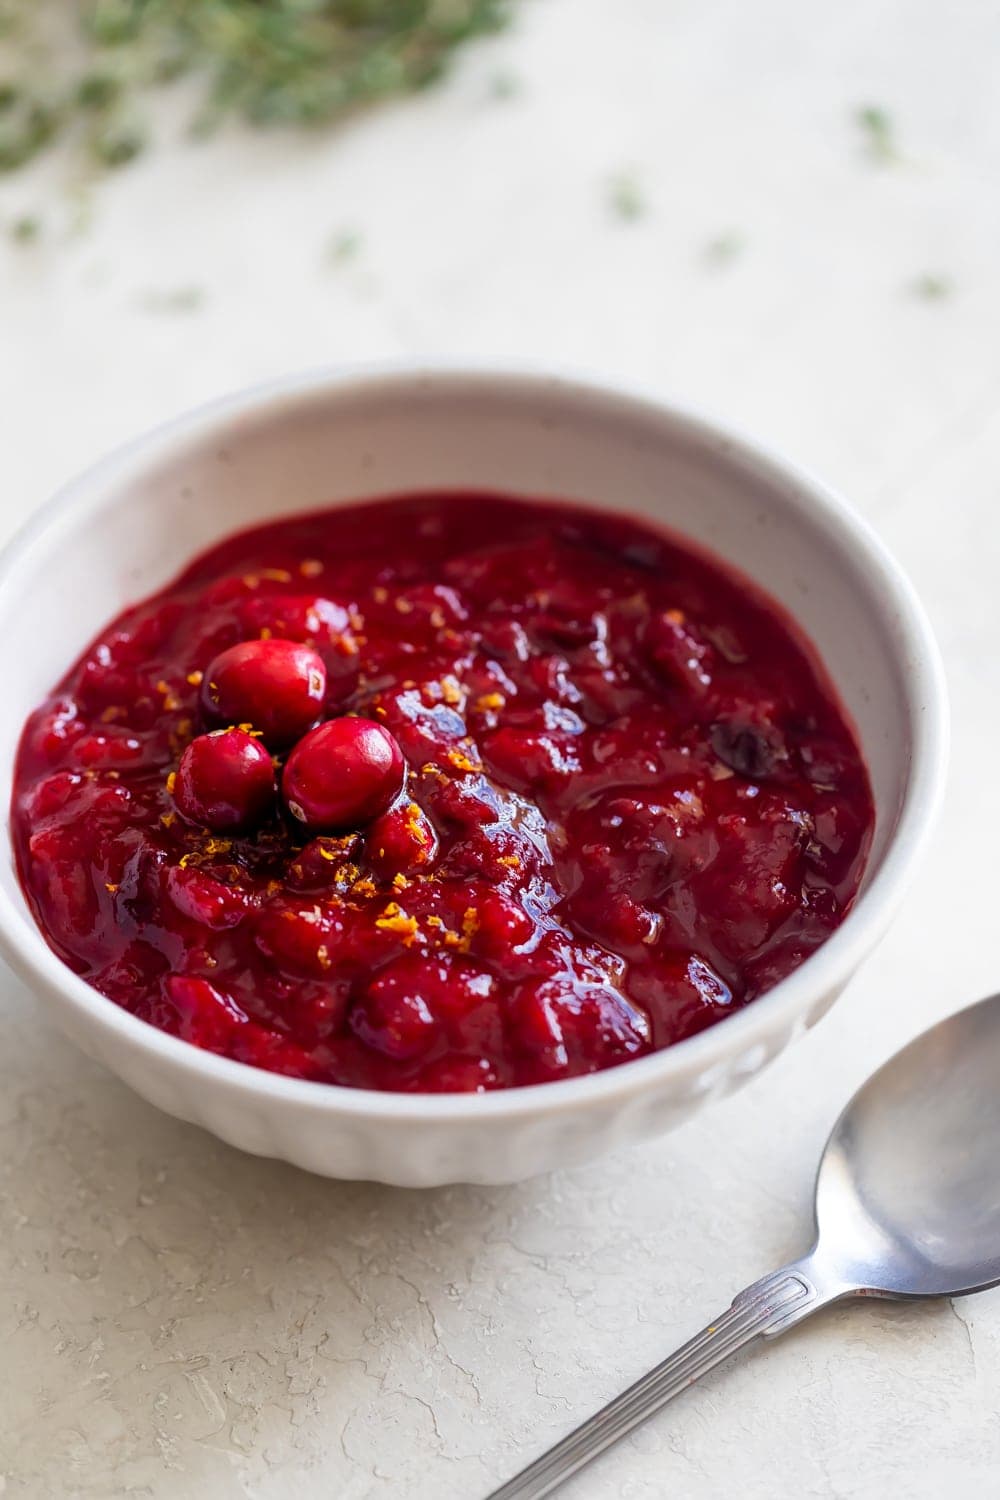 guava cranberry sauce in a white bowl on a white table